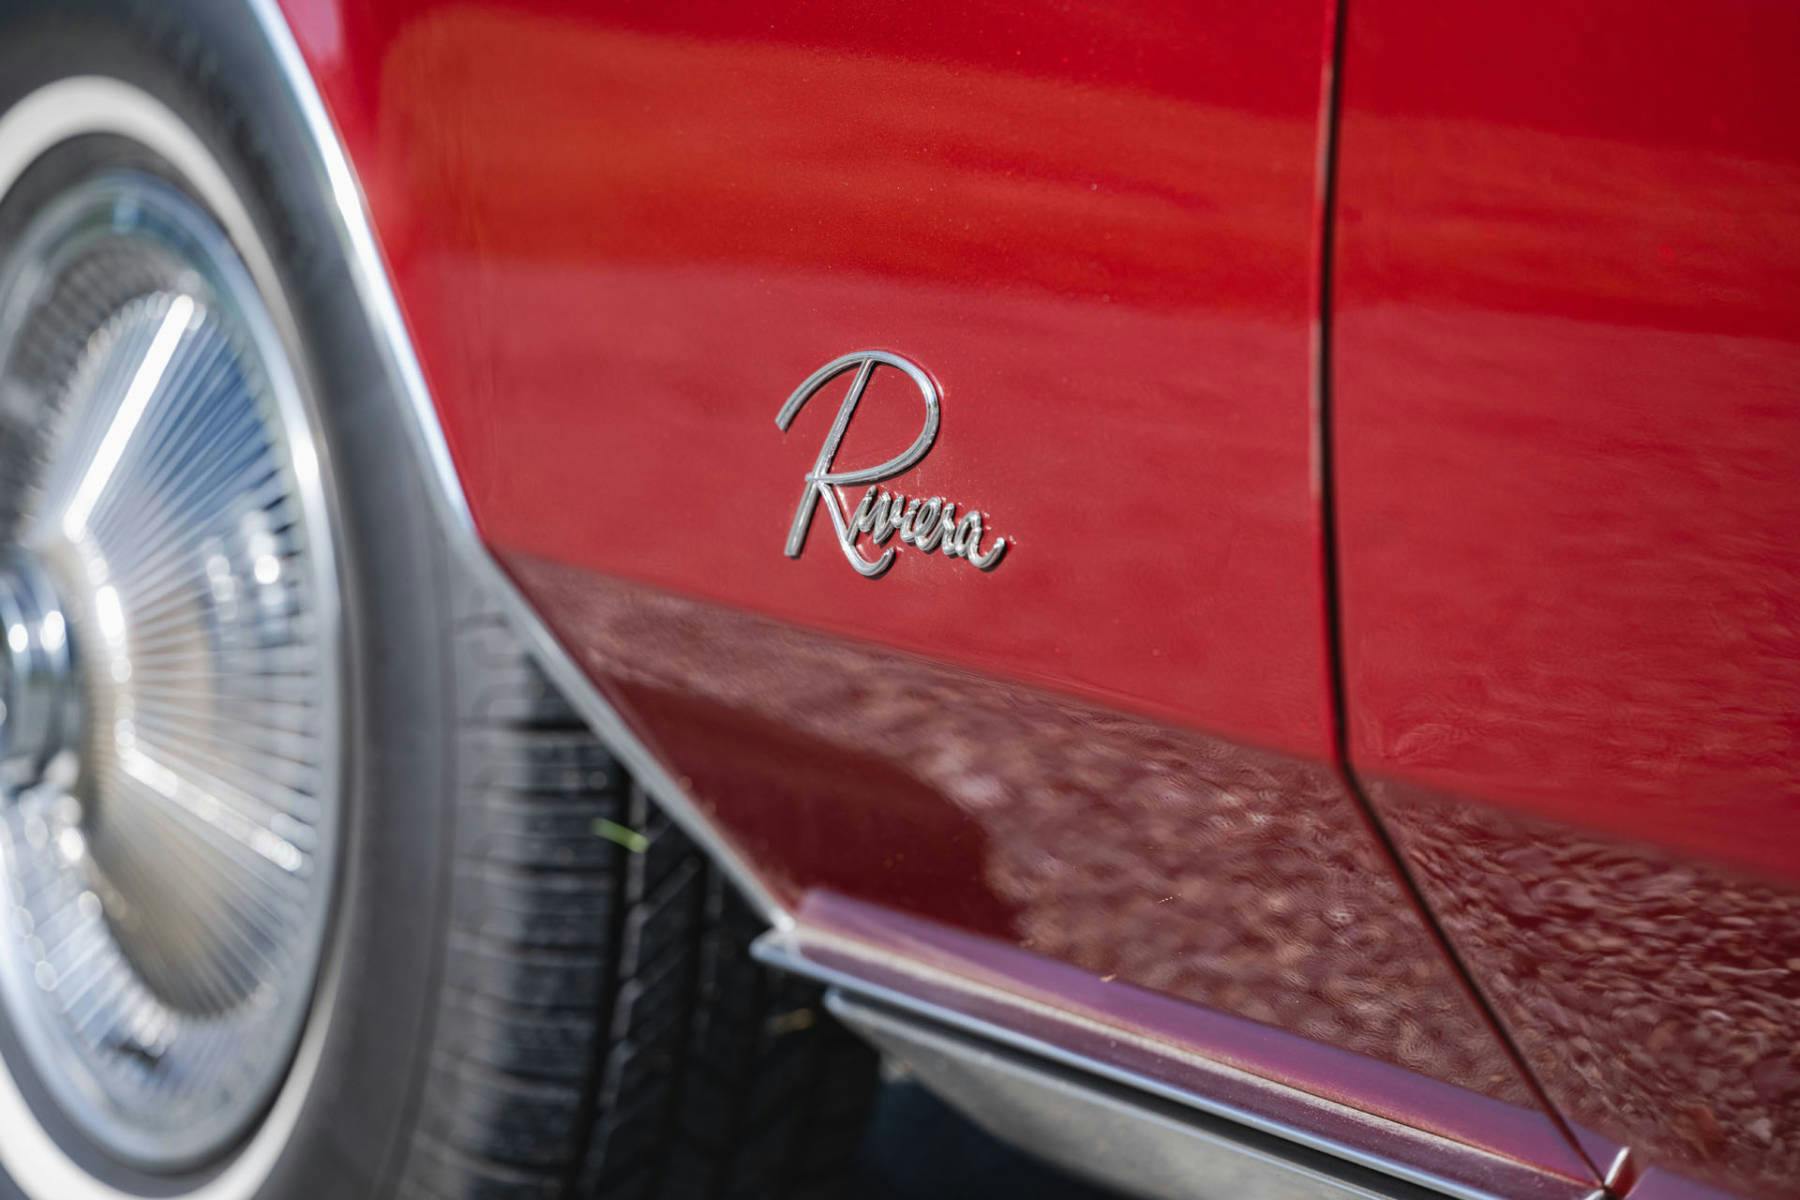 1967 Buick Riviera badge lettering